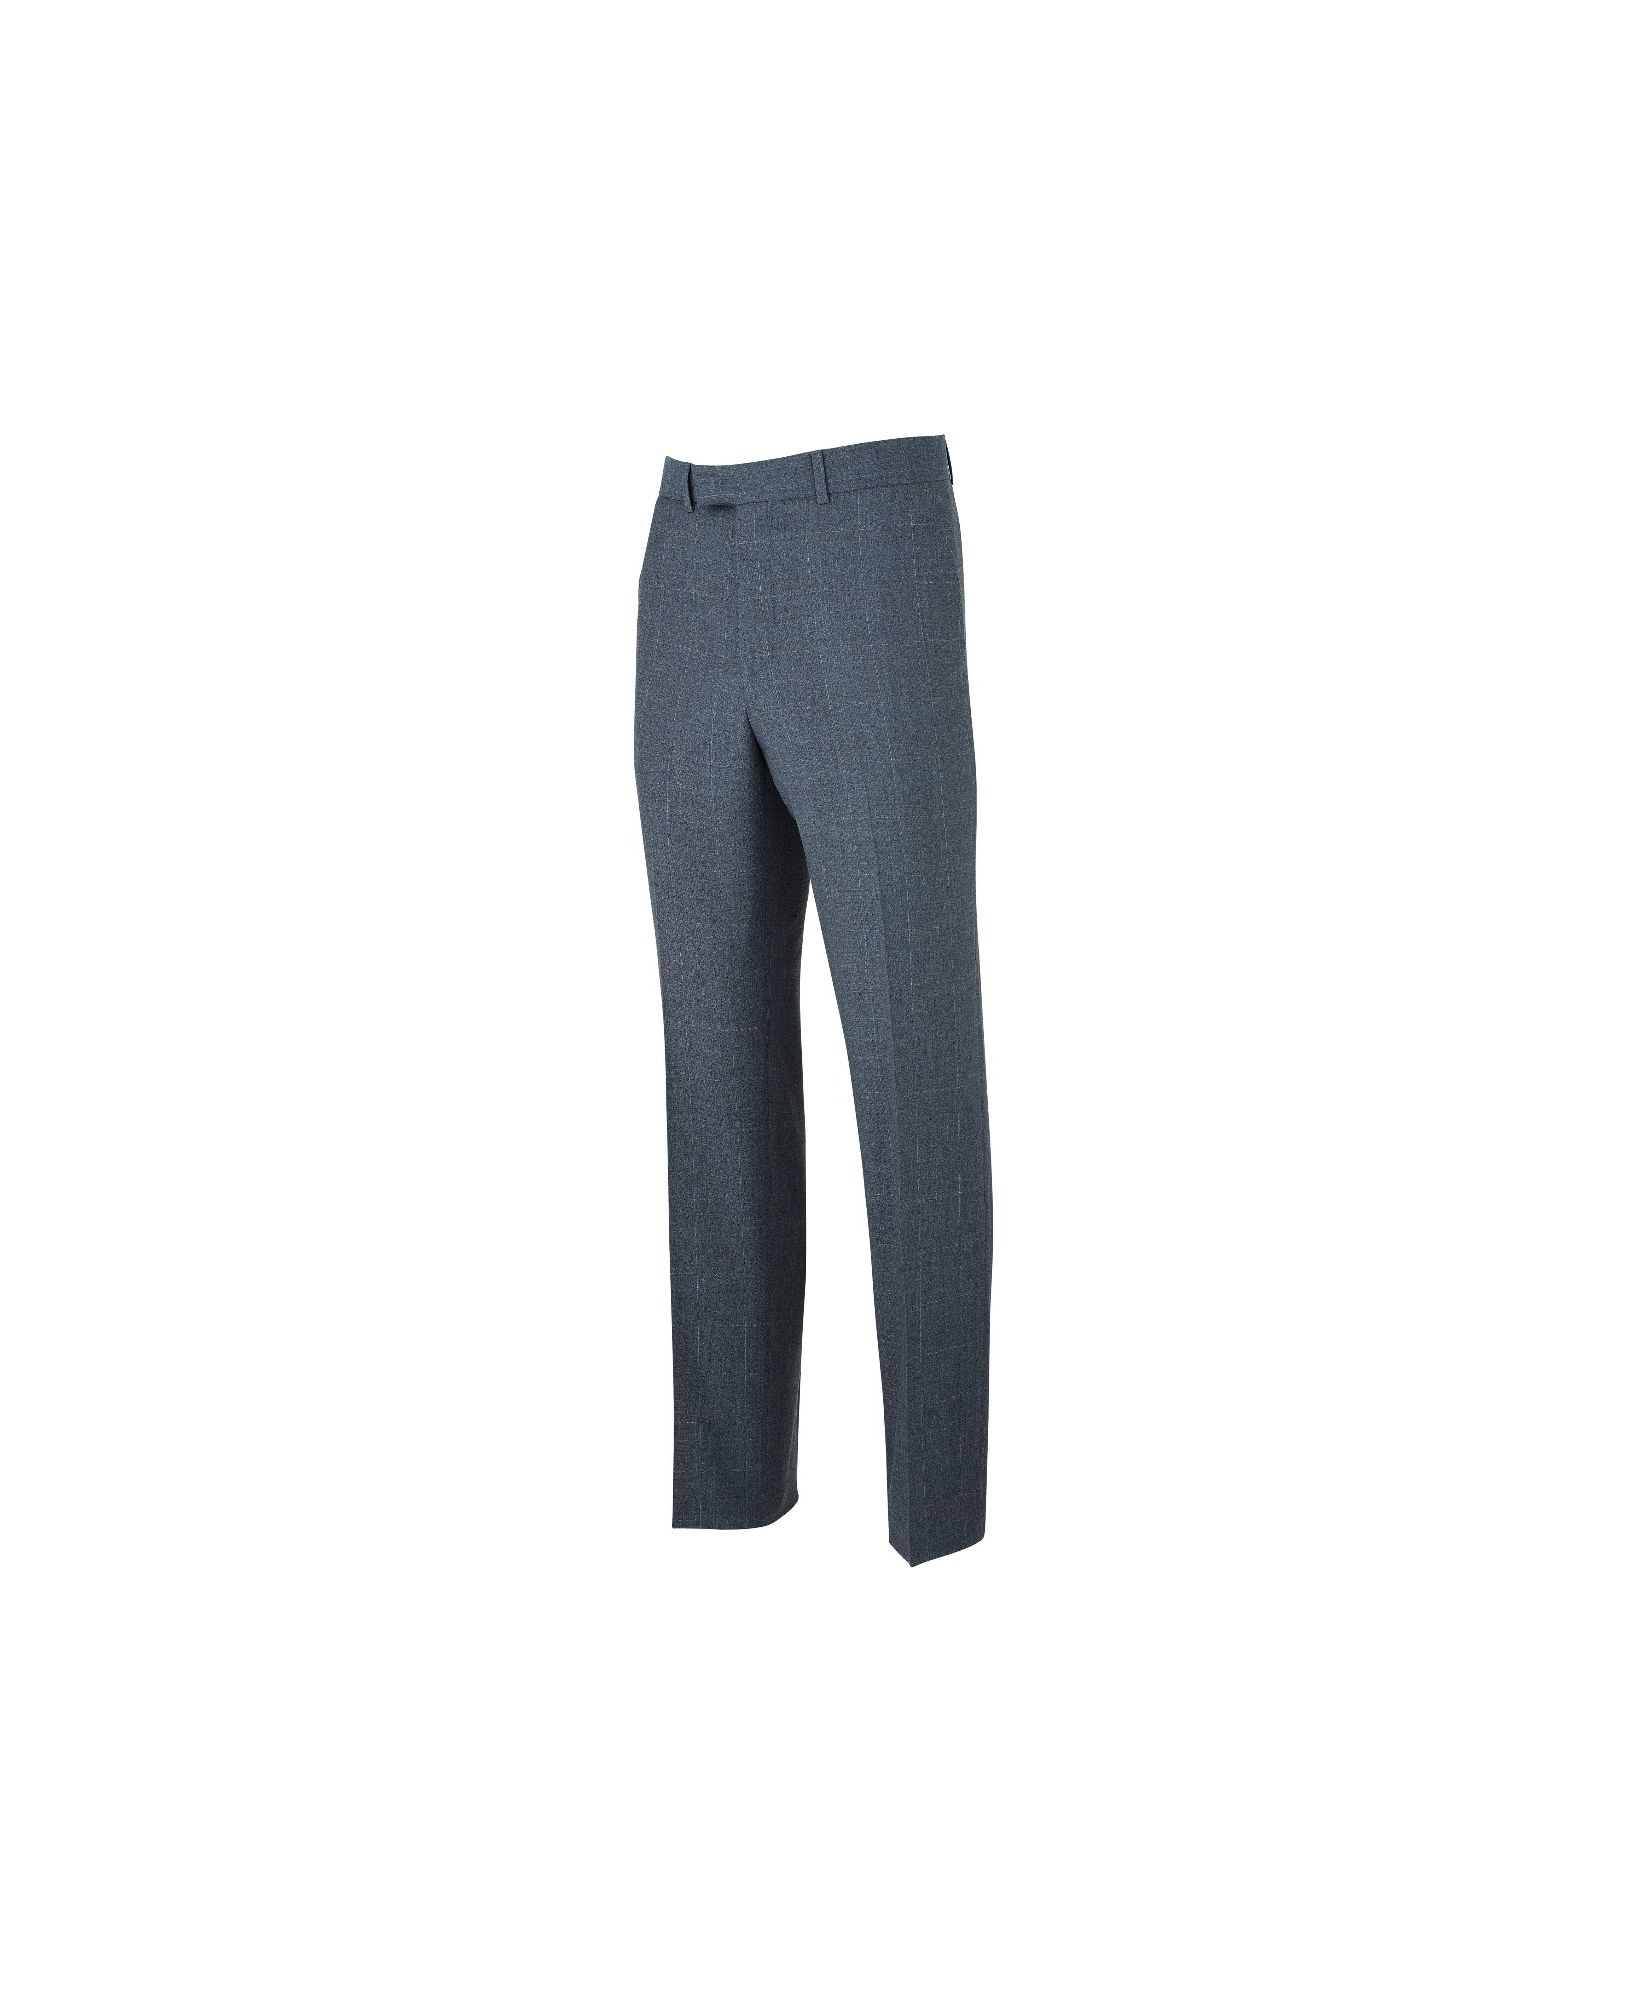 Grey Check Suit Trousers 36